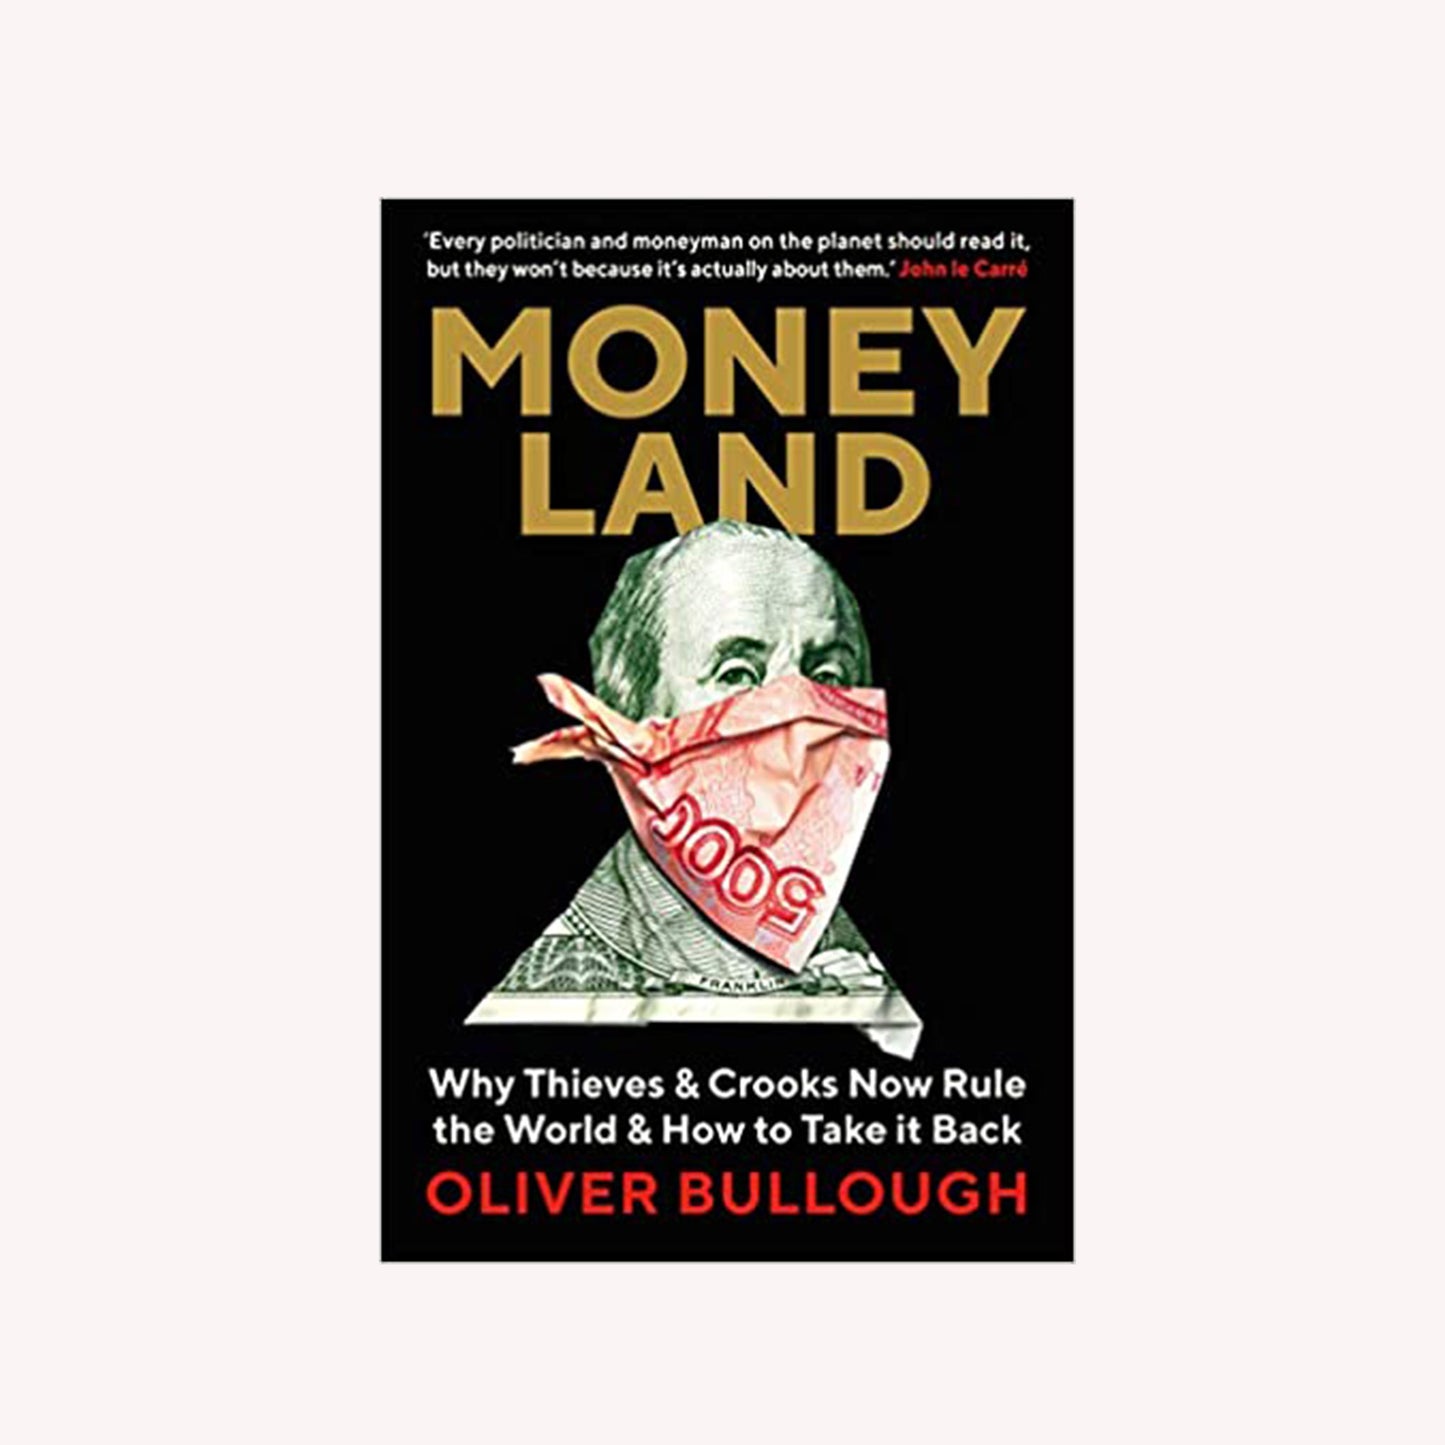 Money Land by Oliver Bullough